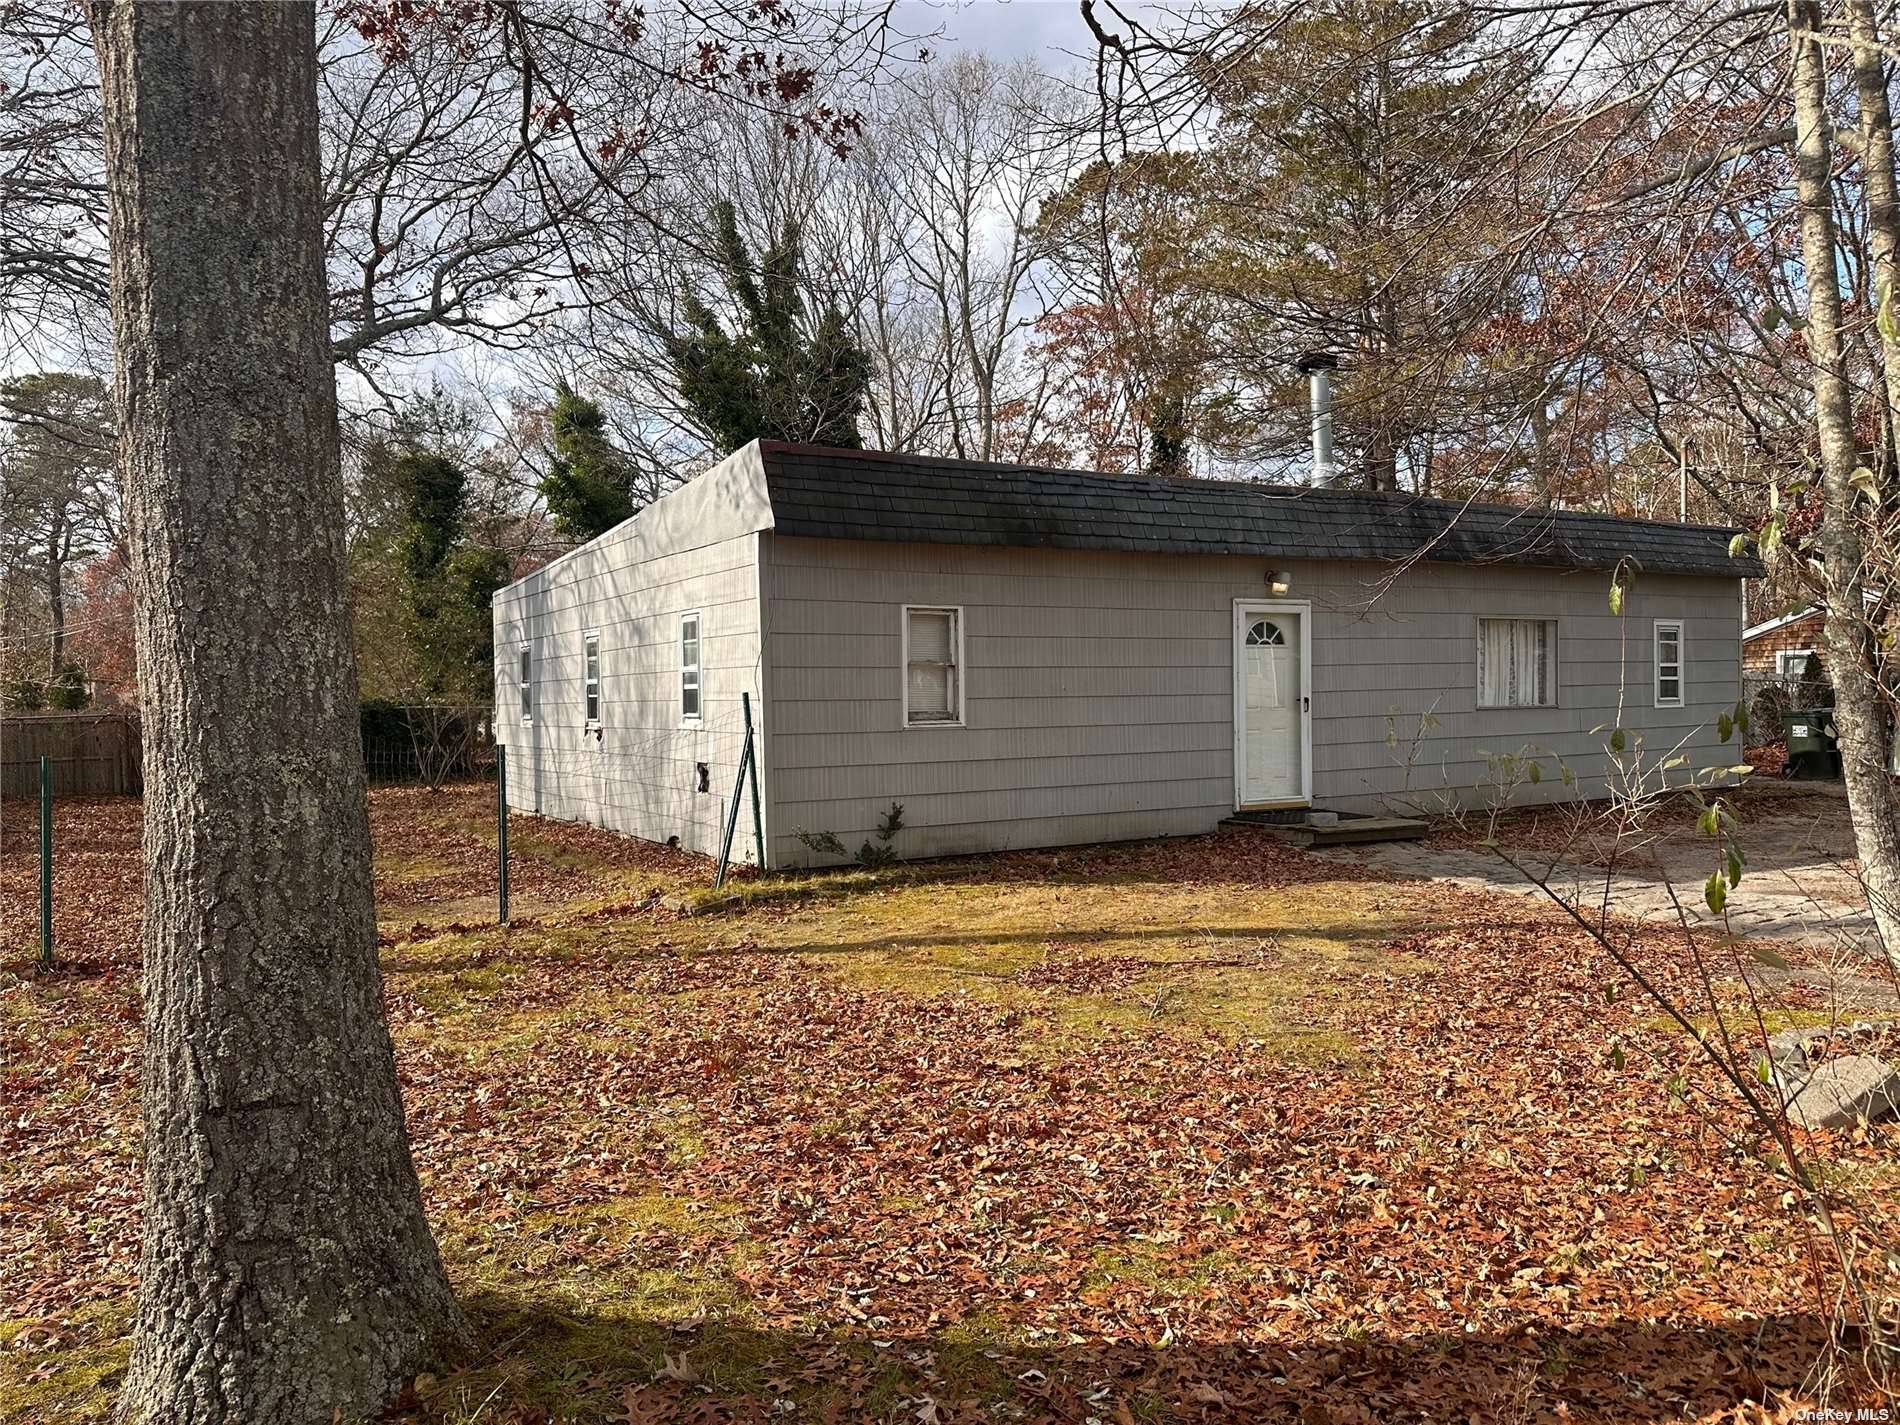 East Quogue ranch with 2 bedrooms, 1 bath.